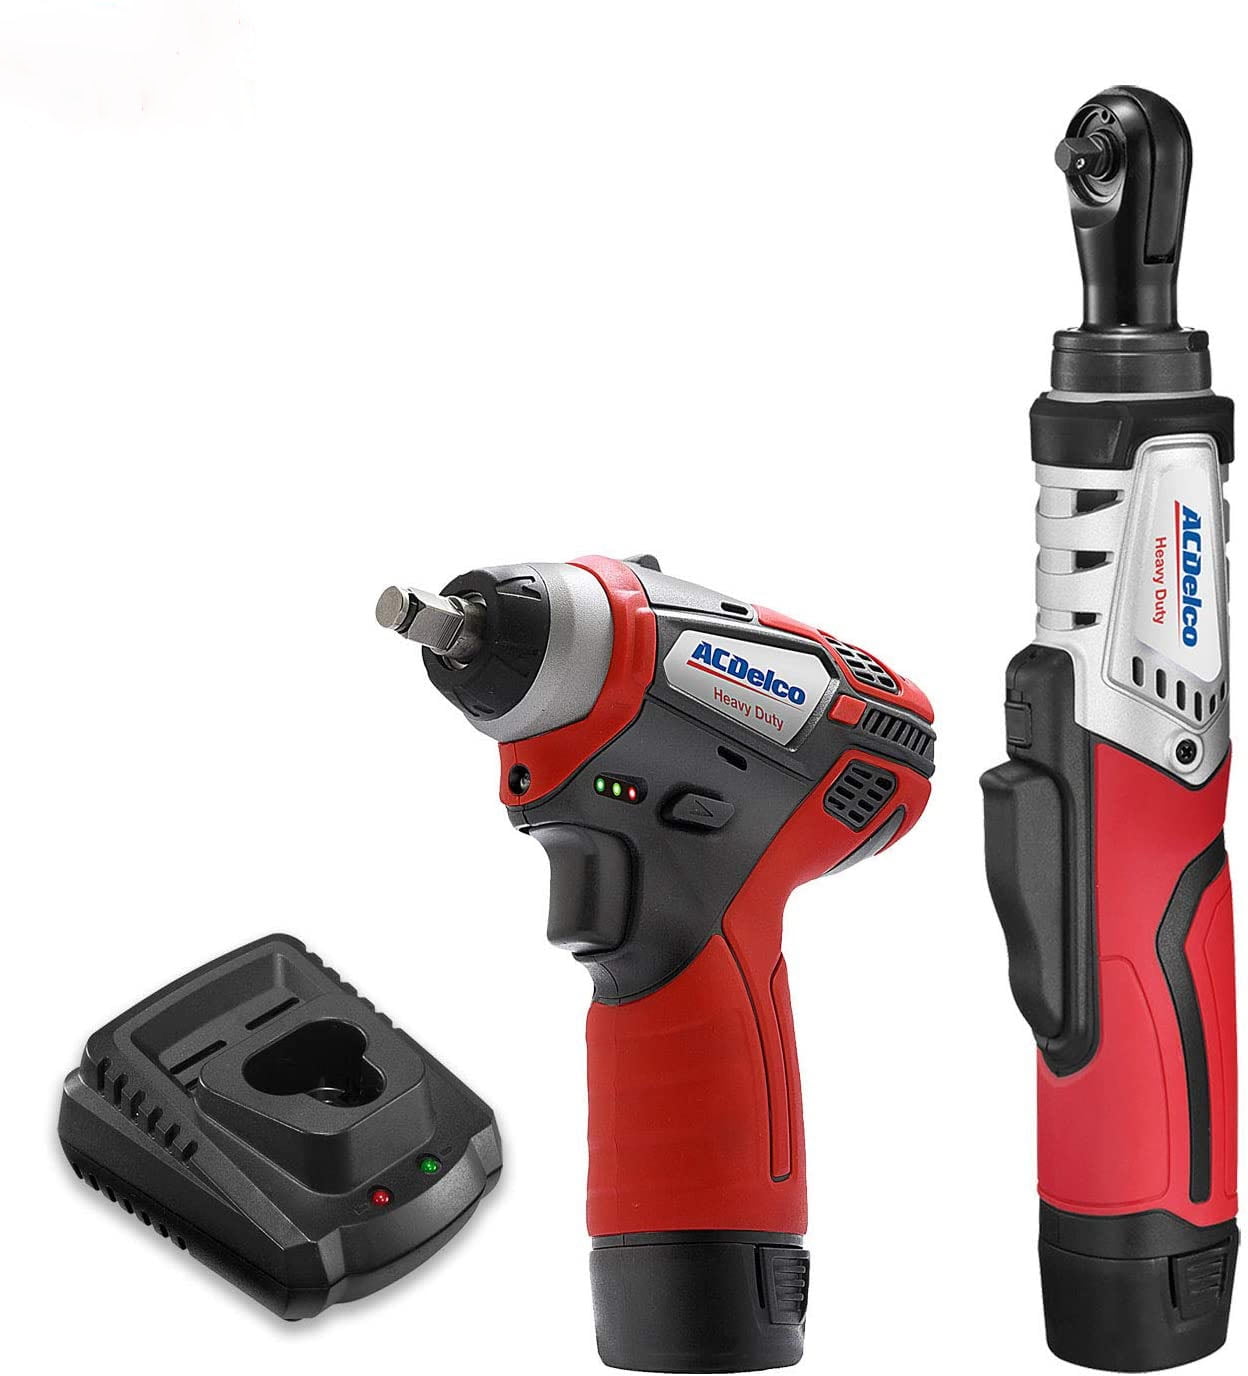 ANI812 ACDelco 1" Square Drive Twin Hammer Pneumatic Impact Wrench Air Tool 